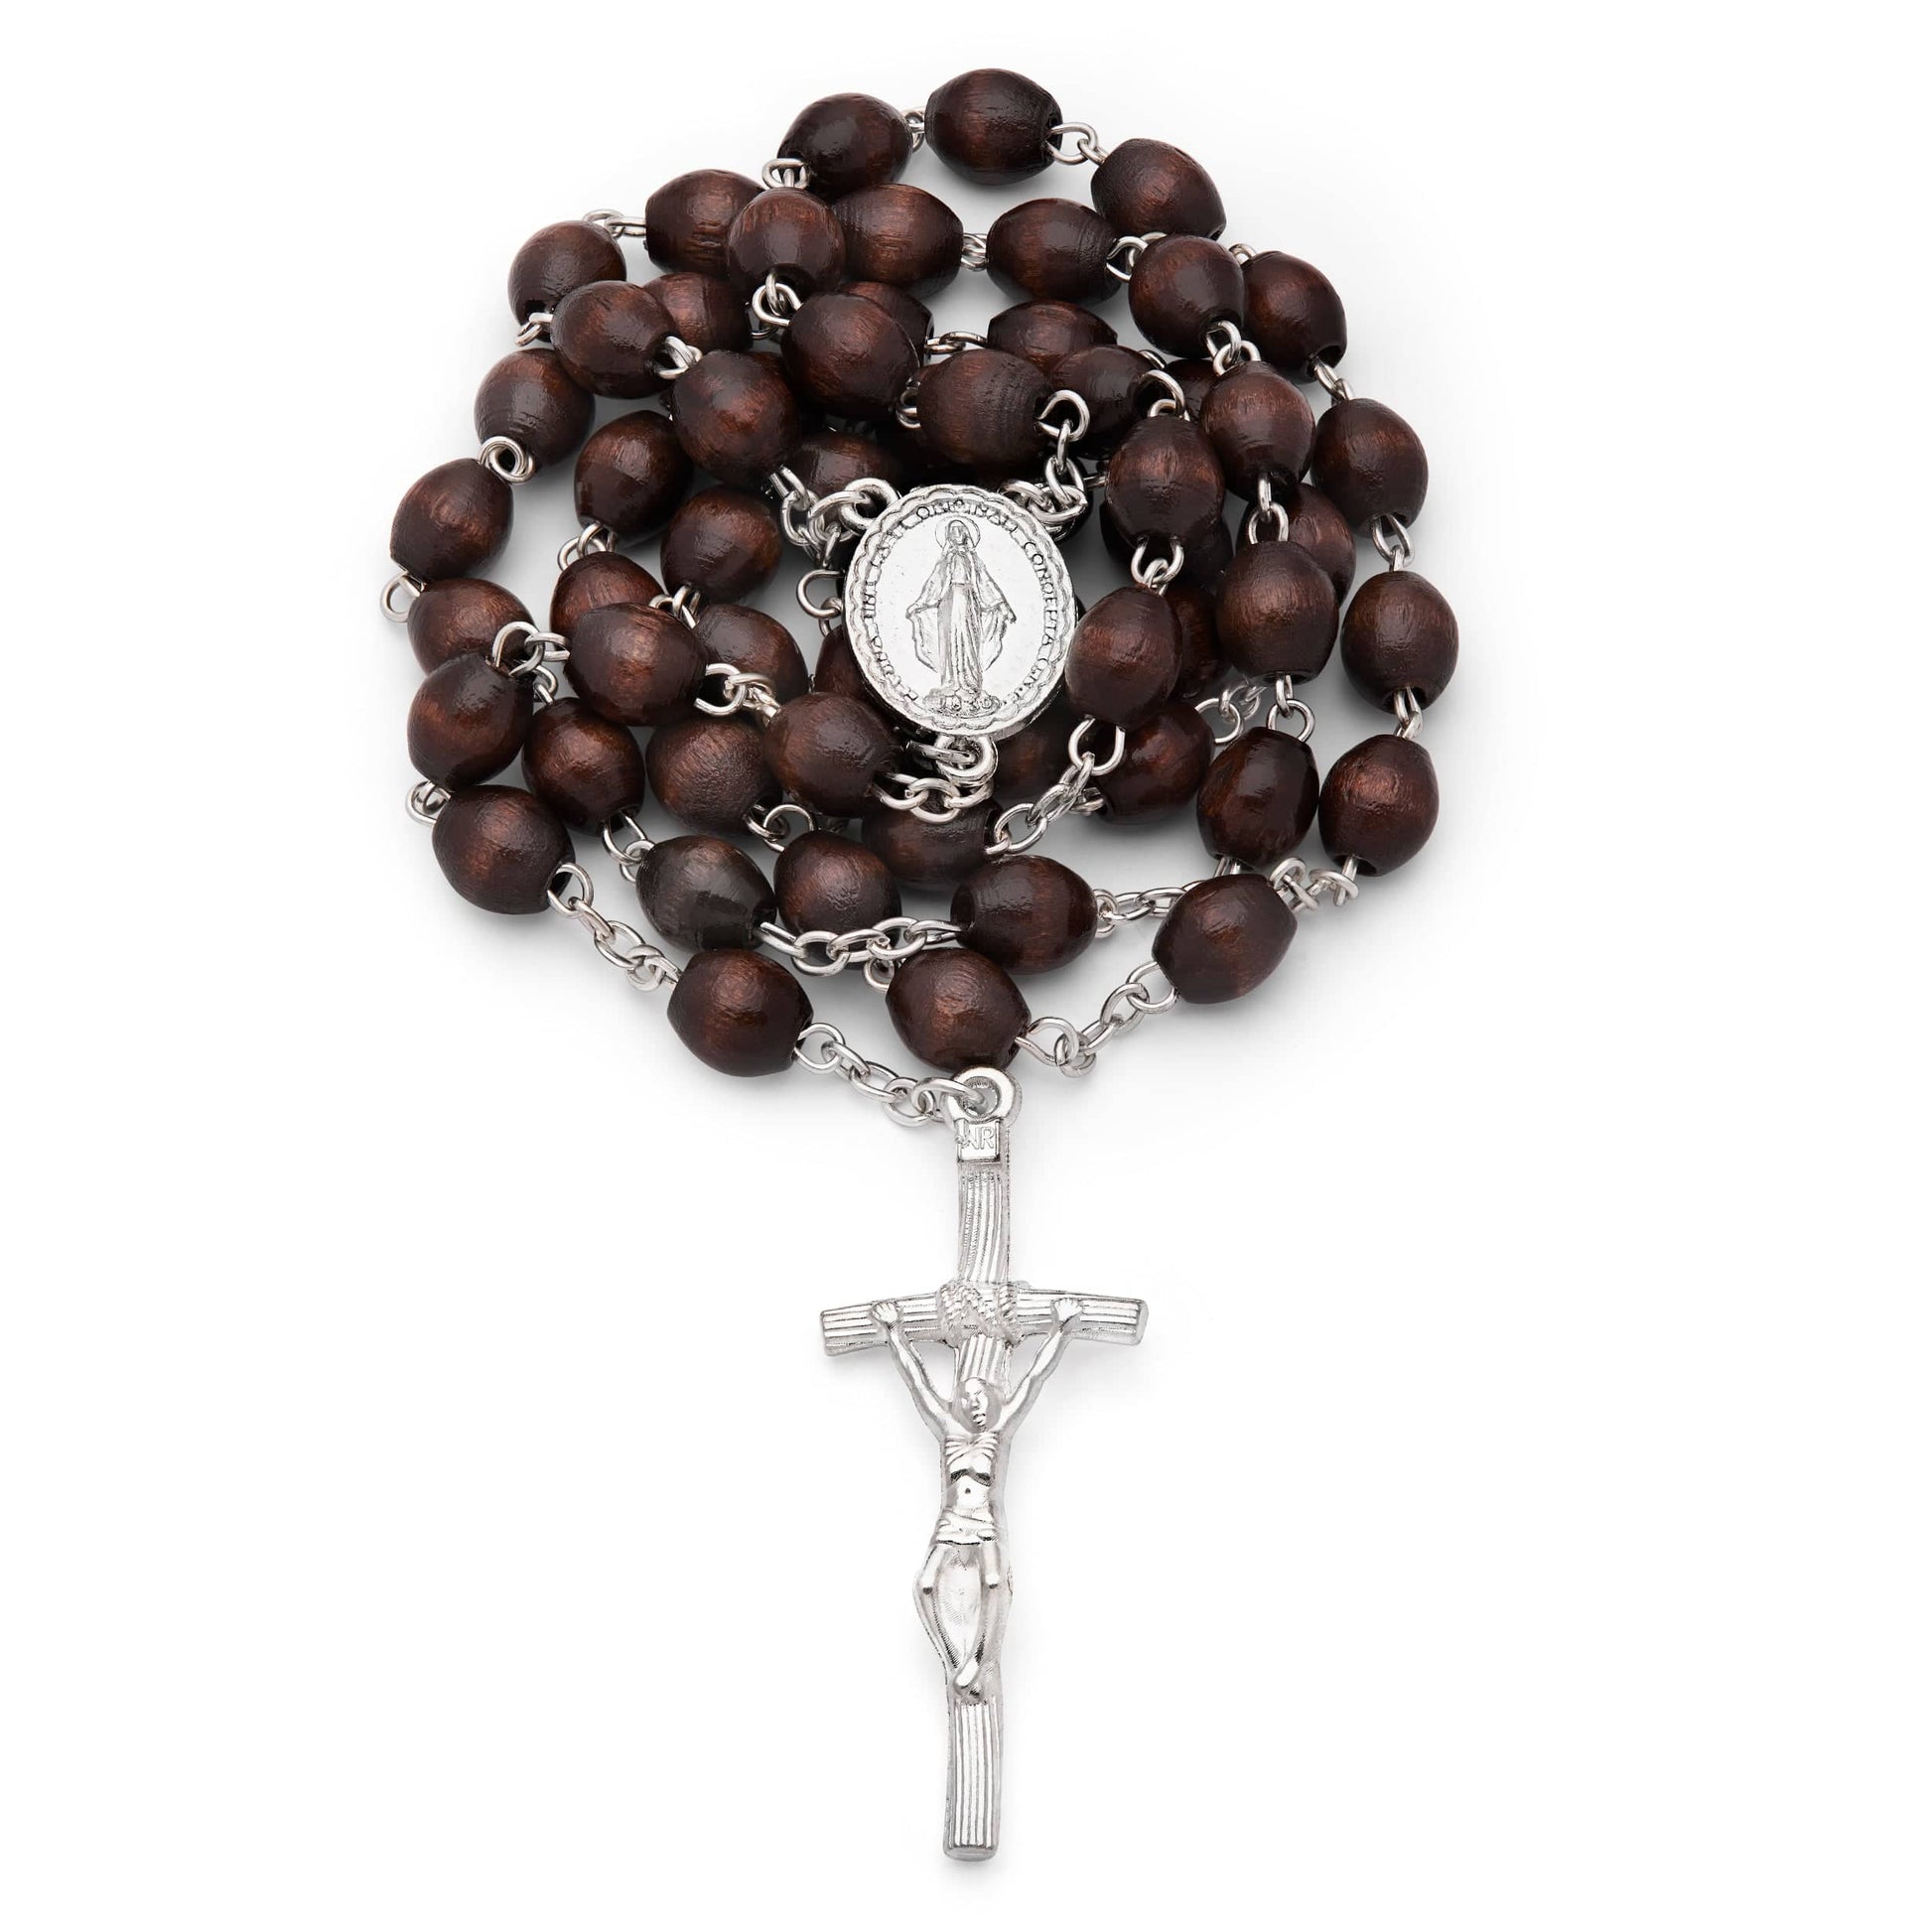 MONDO CATTOLICO Prayer Beads 53 cm (20.90 in) / 7 mm (0.30 in) Jesus of Divine Mercy Brown Case and Rosary